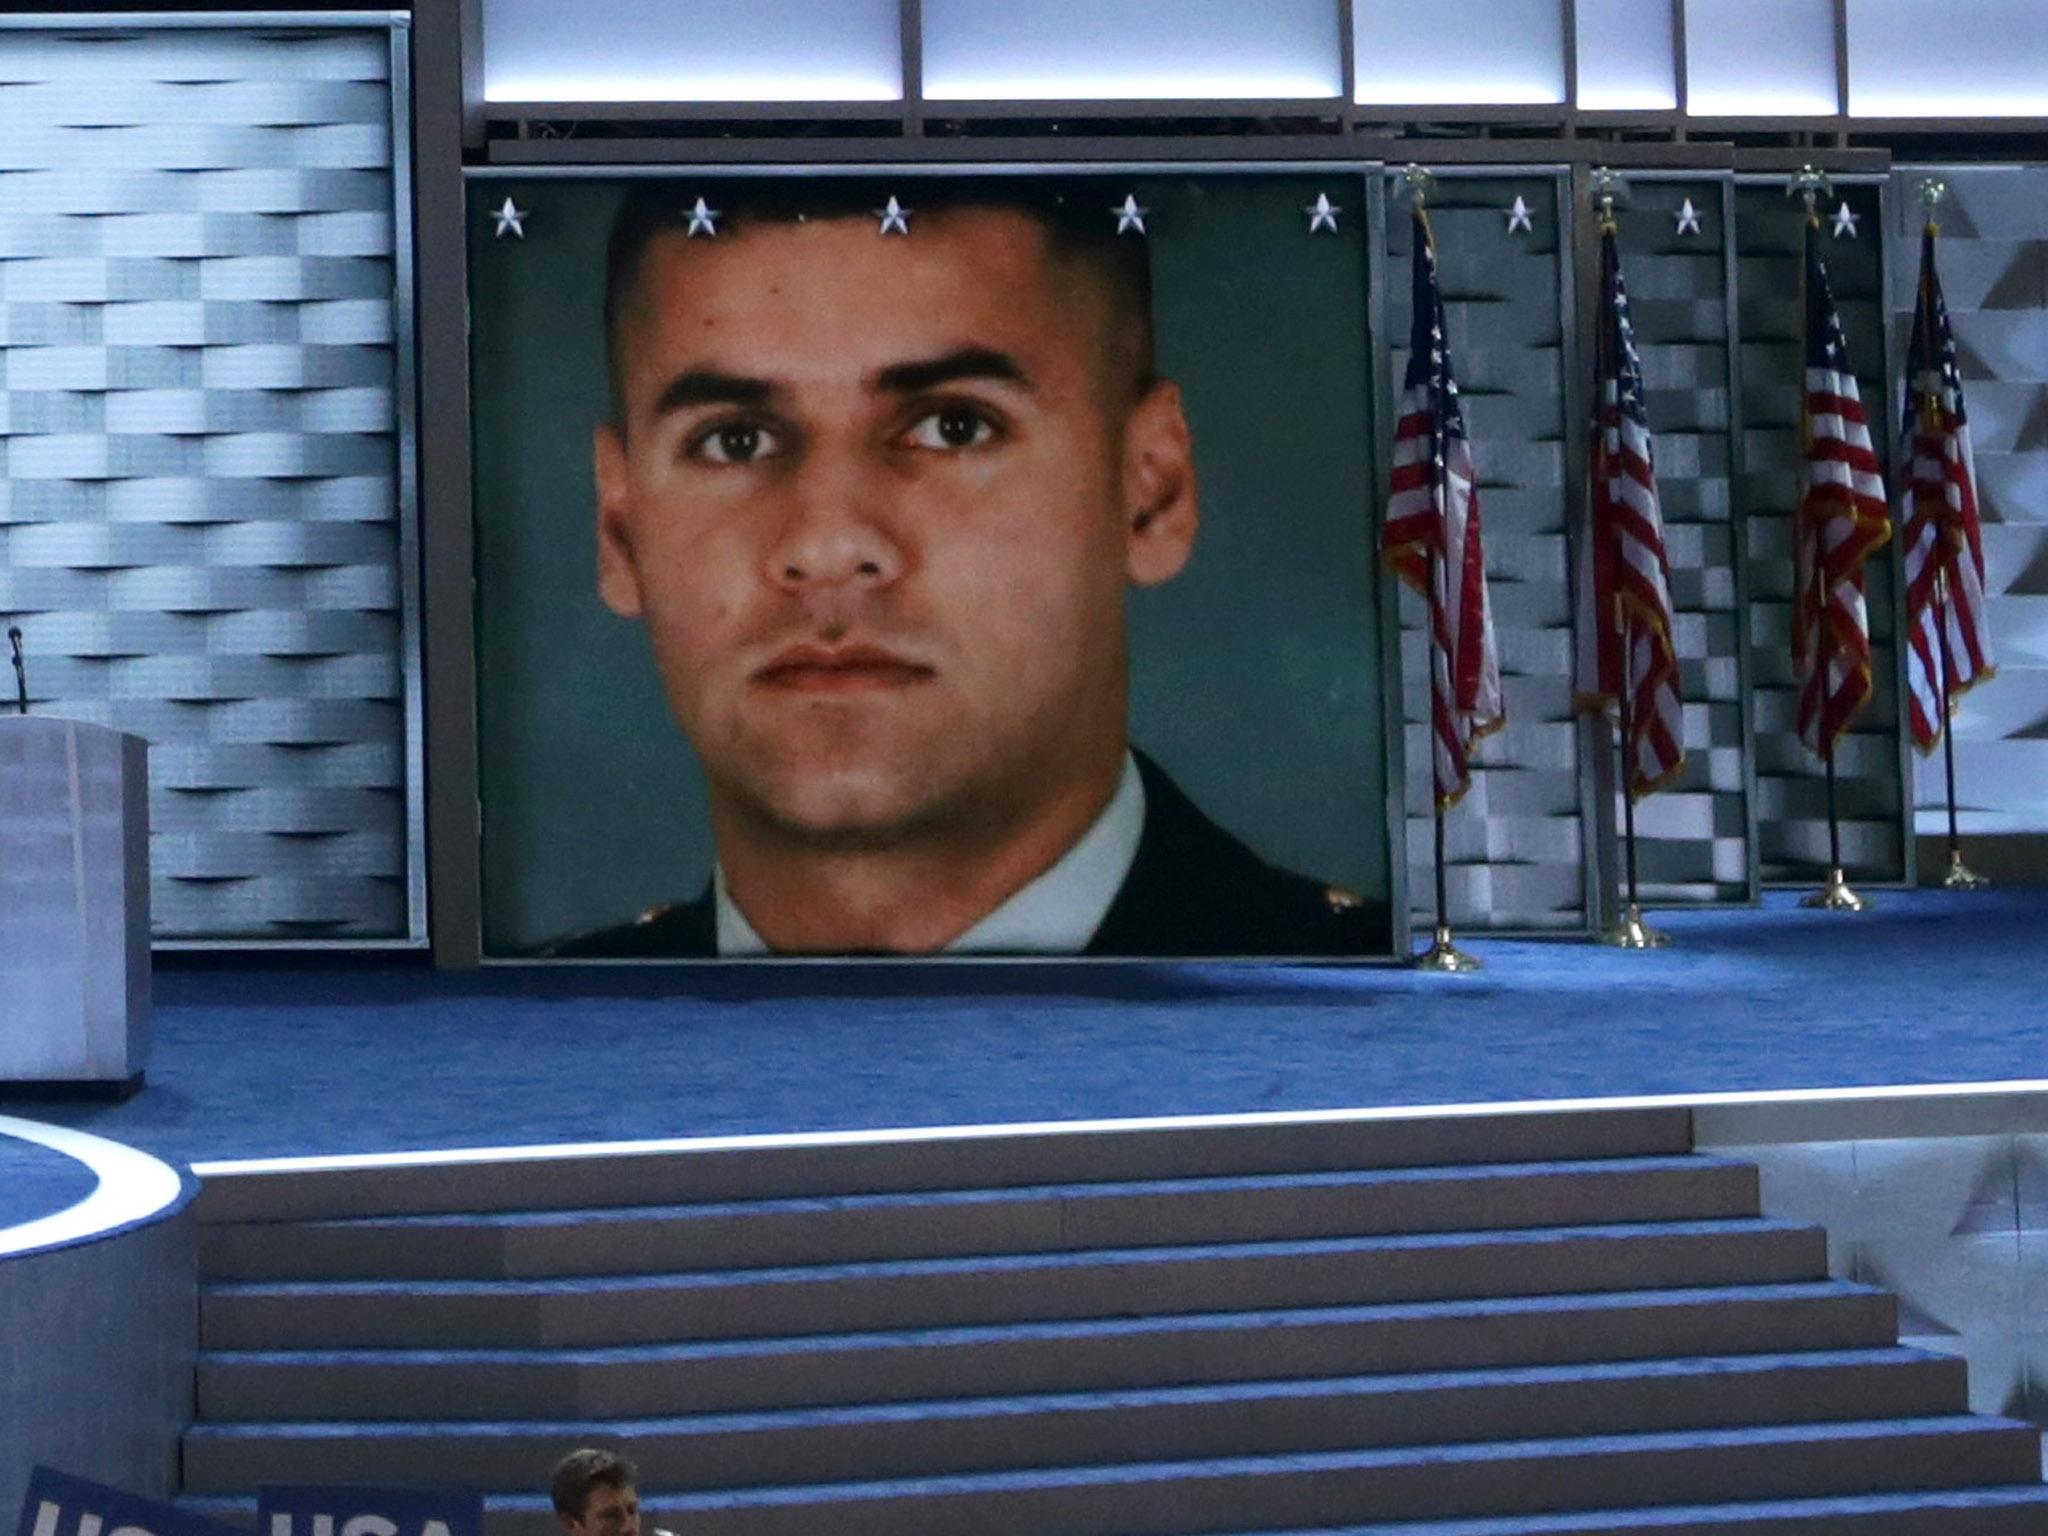 An image of fallen U.S. Army Capt. Humayun S. M. Khan is displayed on a screen as his father Khizr Khan delivers remarks on the fourth day of the Democratic National Convention